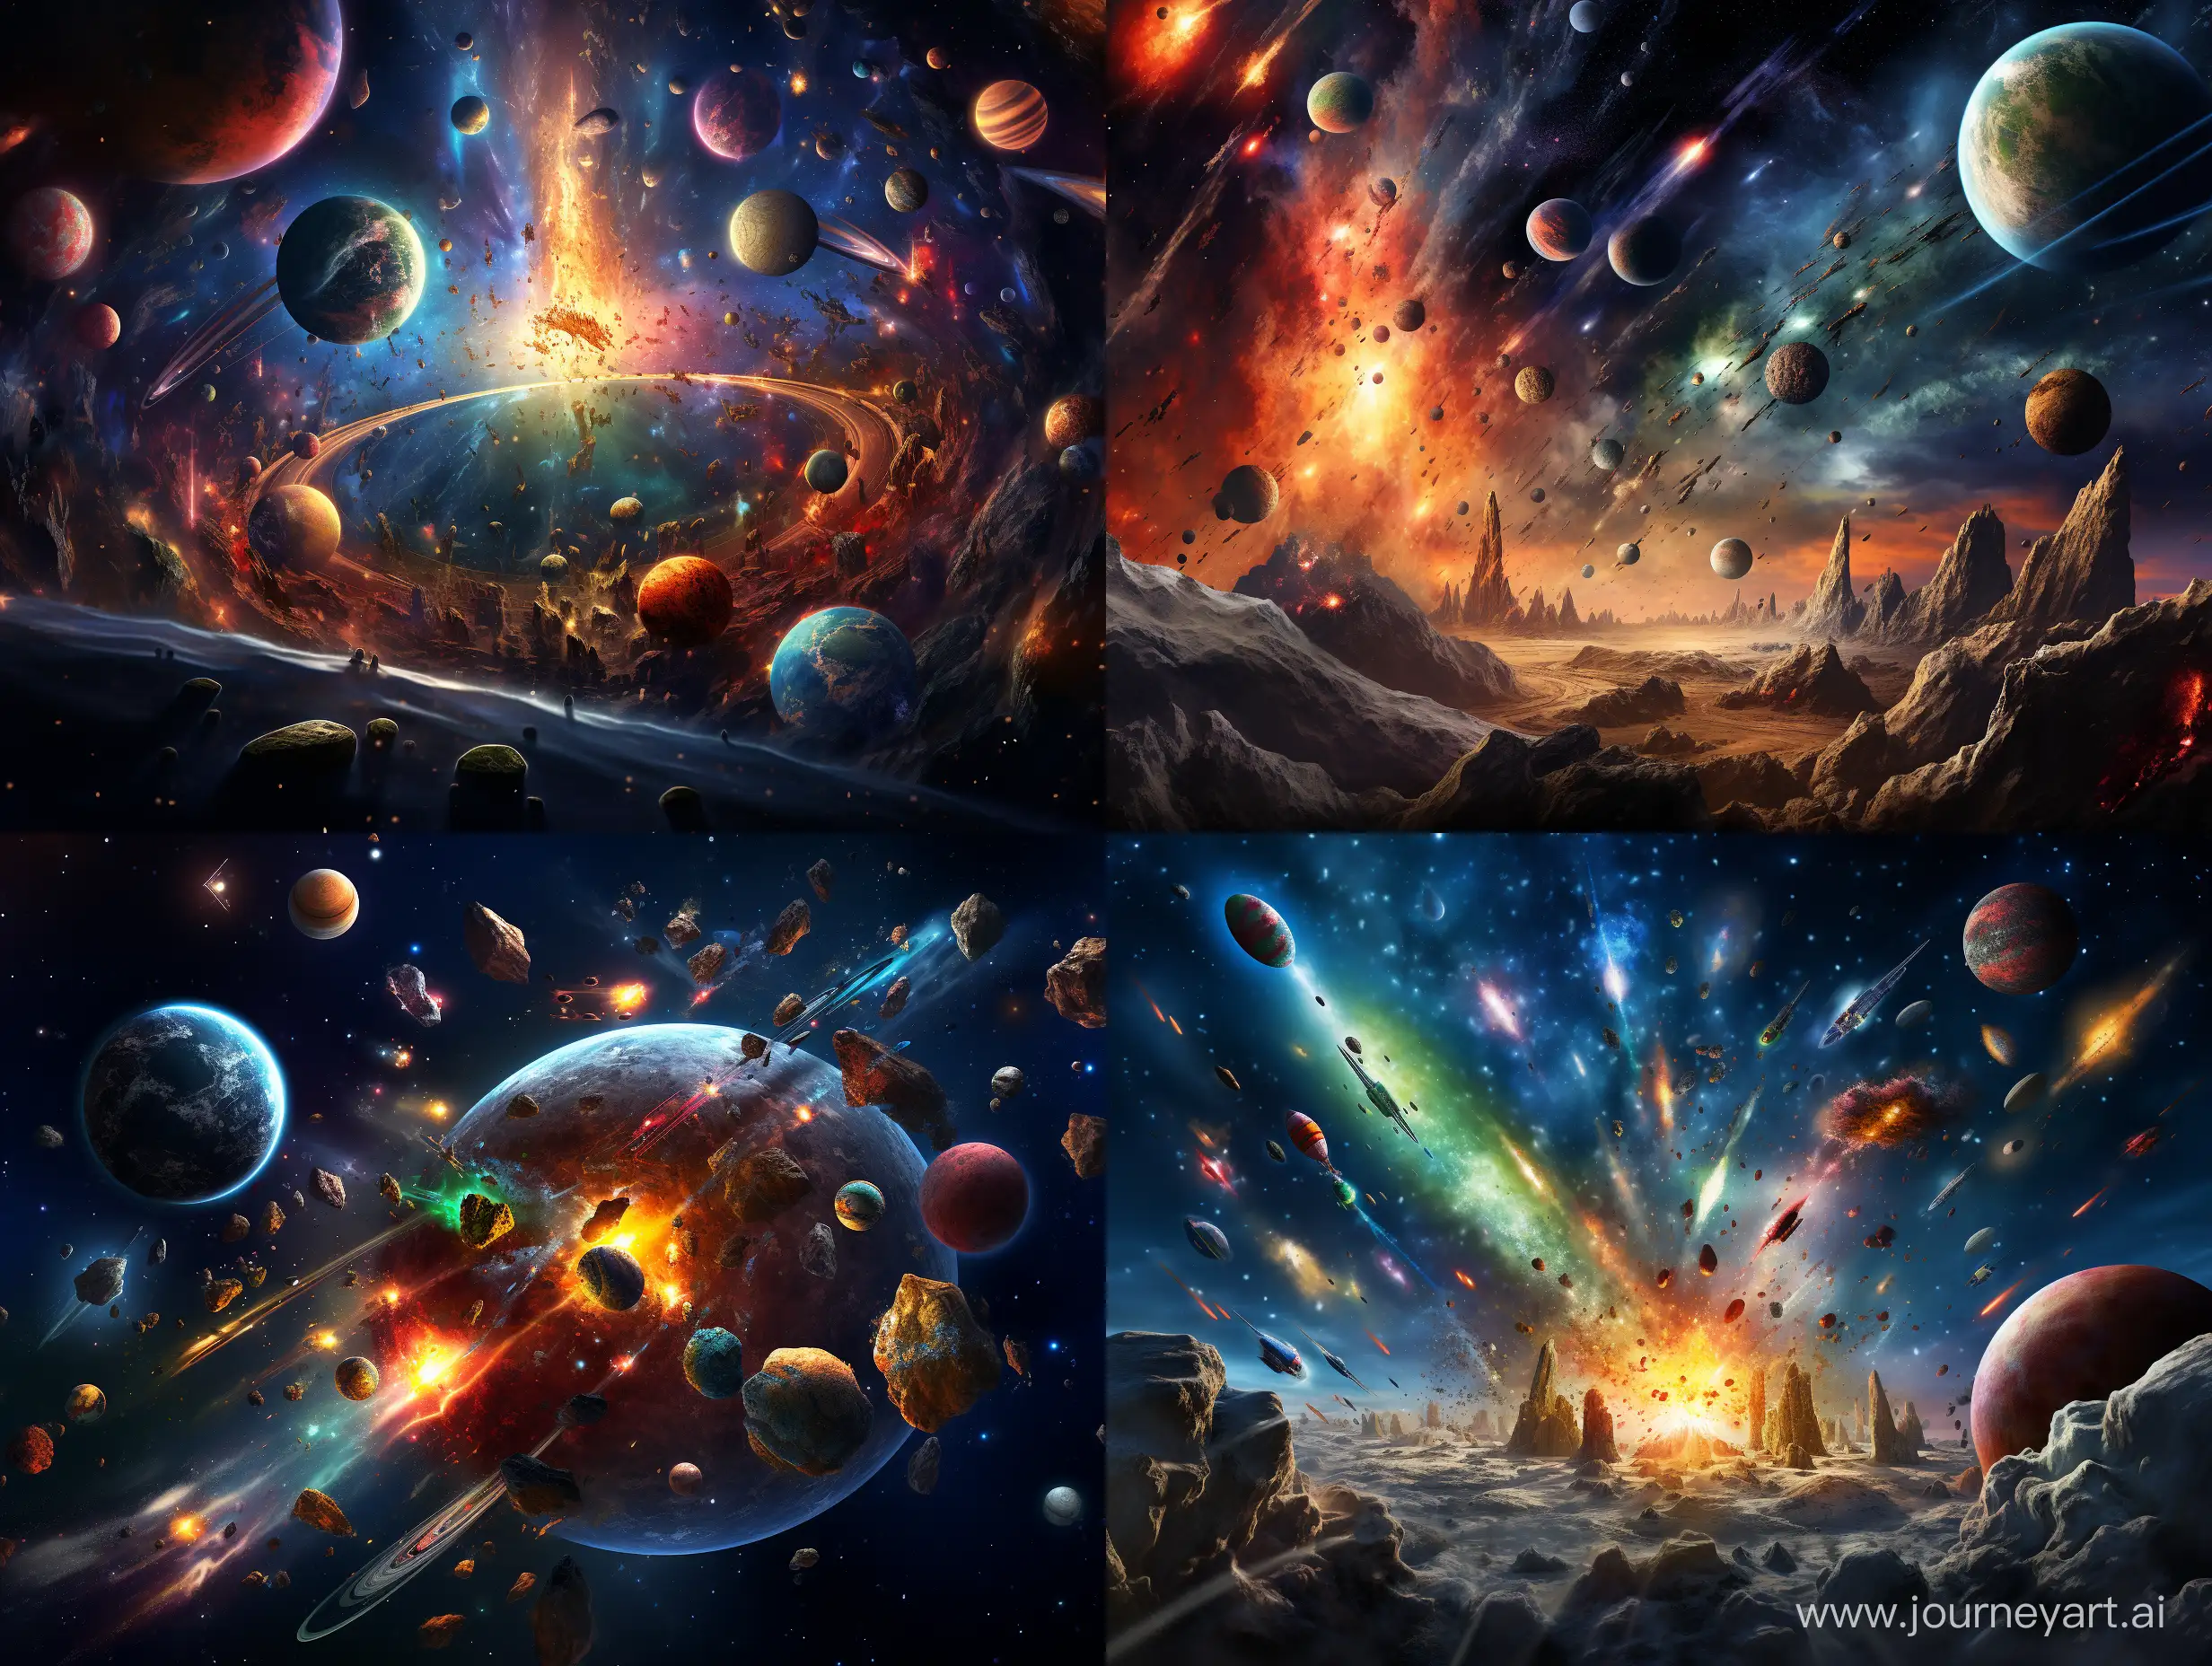 An image that represents astronomy with planets, stars of various types, and galaxies, and space missions with rockets and starships.